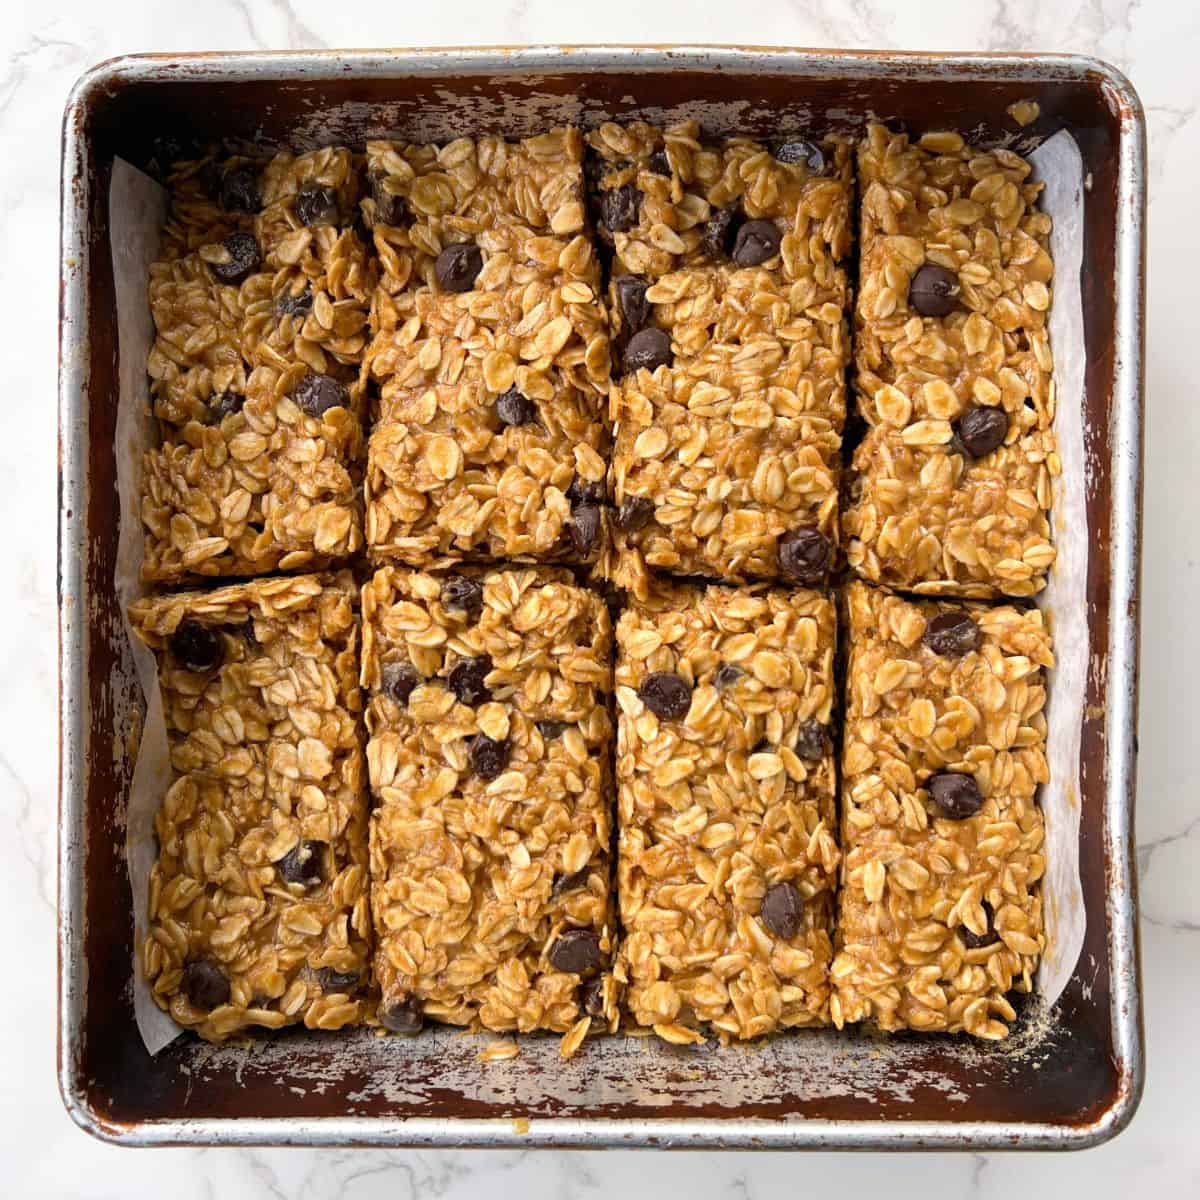 No Bake Chocolate Oat Bars with Peanut Butter sliced in an 8x8 square baking pan.